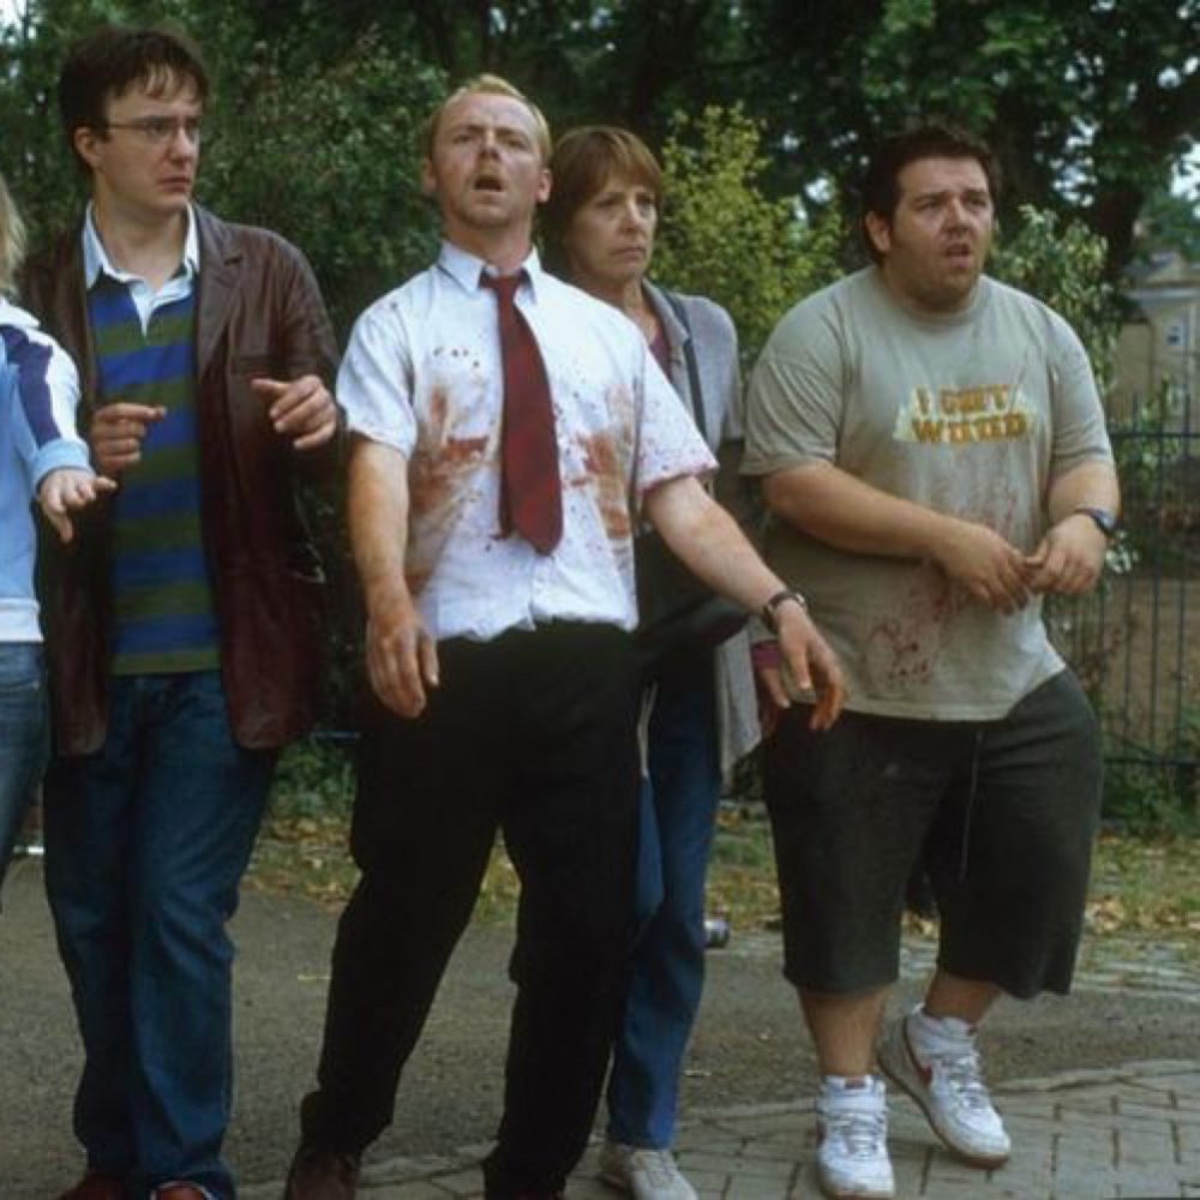 Shaun of the Dead Costume - Shaun of the Dead Fancy Dress - Shaun and Ed Cosplay - Shaun Black Shoes